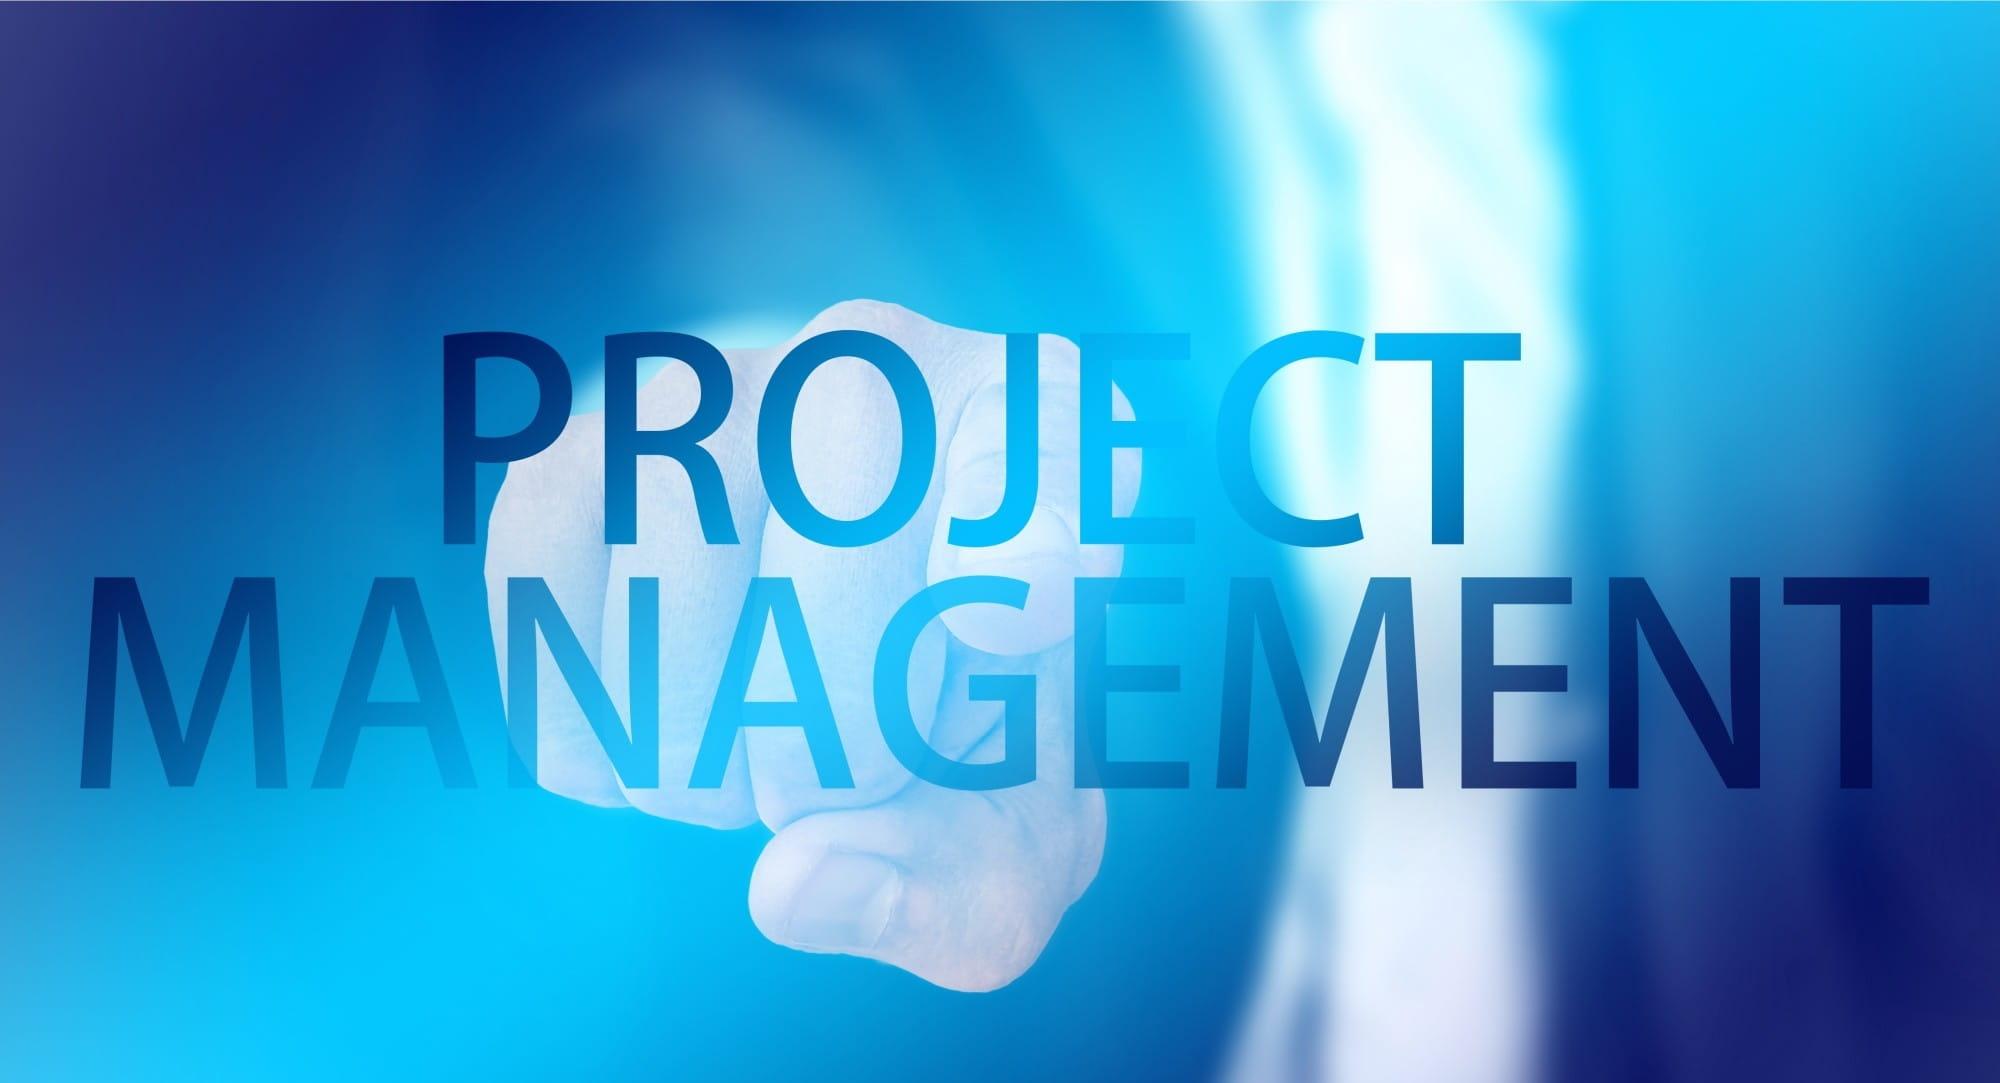 Are you interested in advancing your project management skills? Click here for seven benefits of taking project management courses.